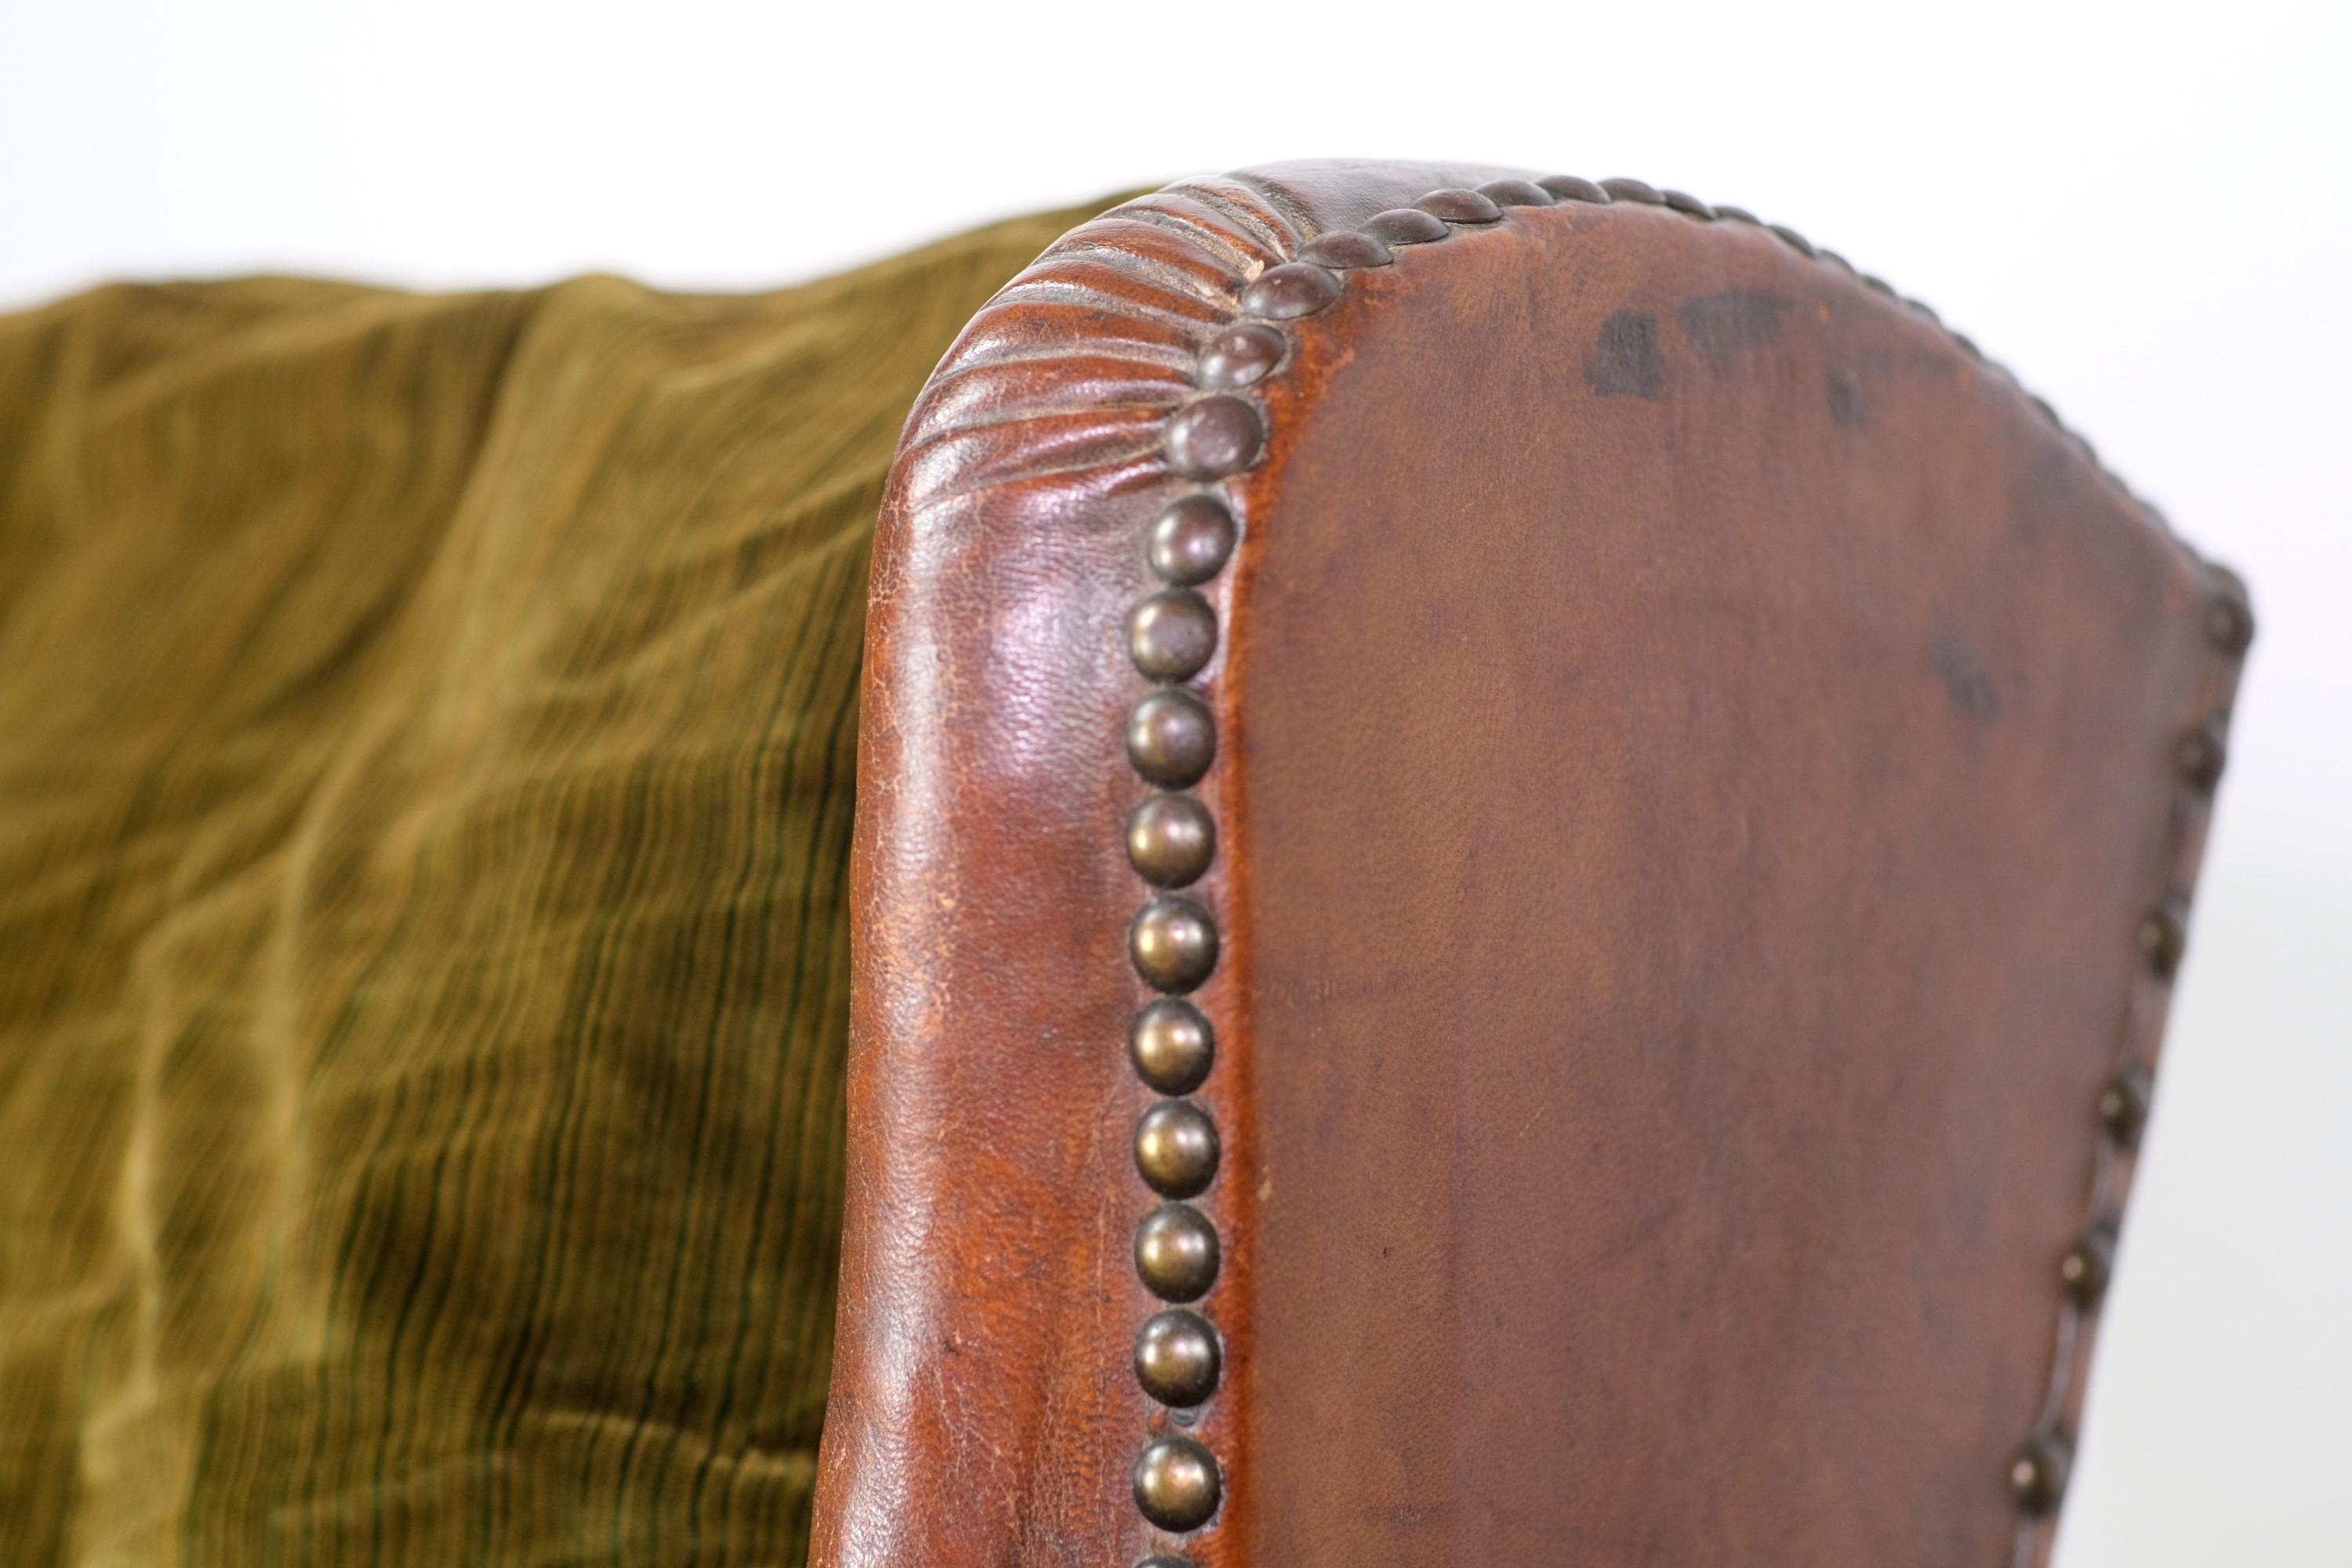 round leather chair